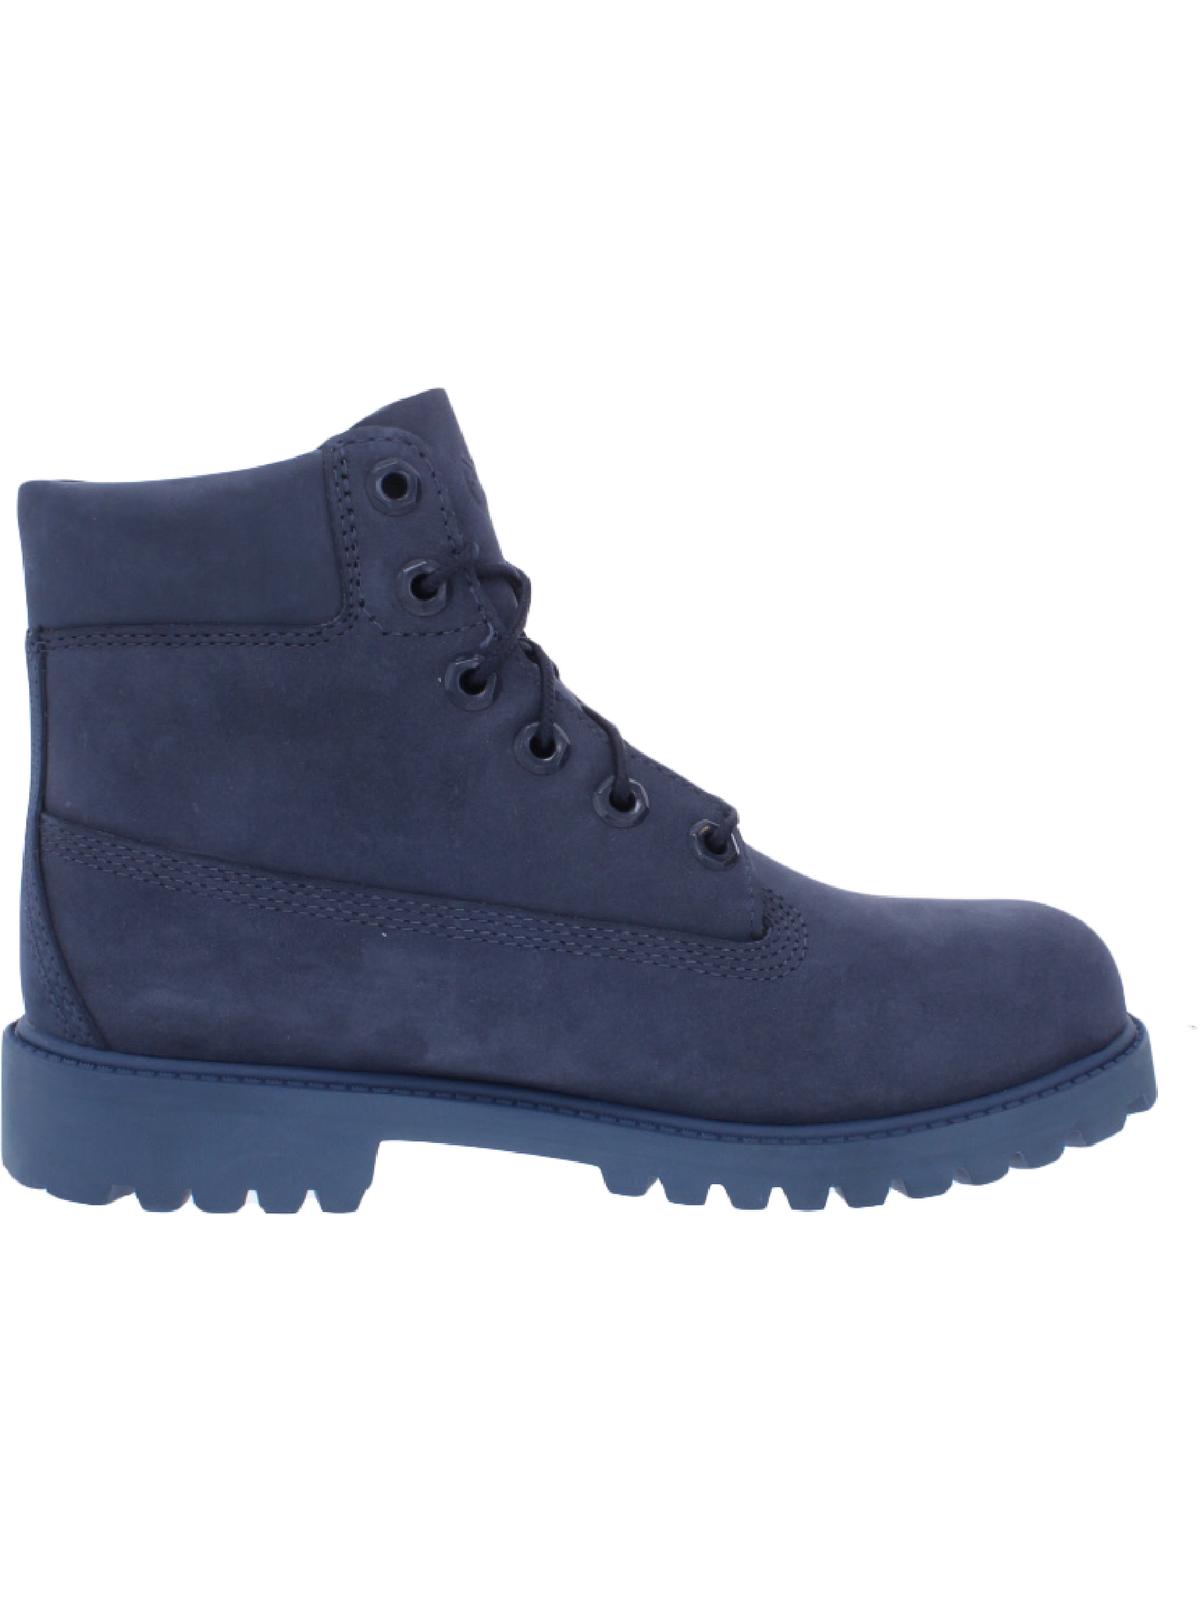 Timberland Boys Leather Lace Up Ankle Boots Blue 4 Medium (D) Big Kid - image 2 of 3